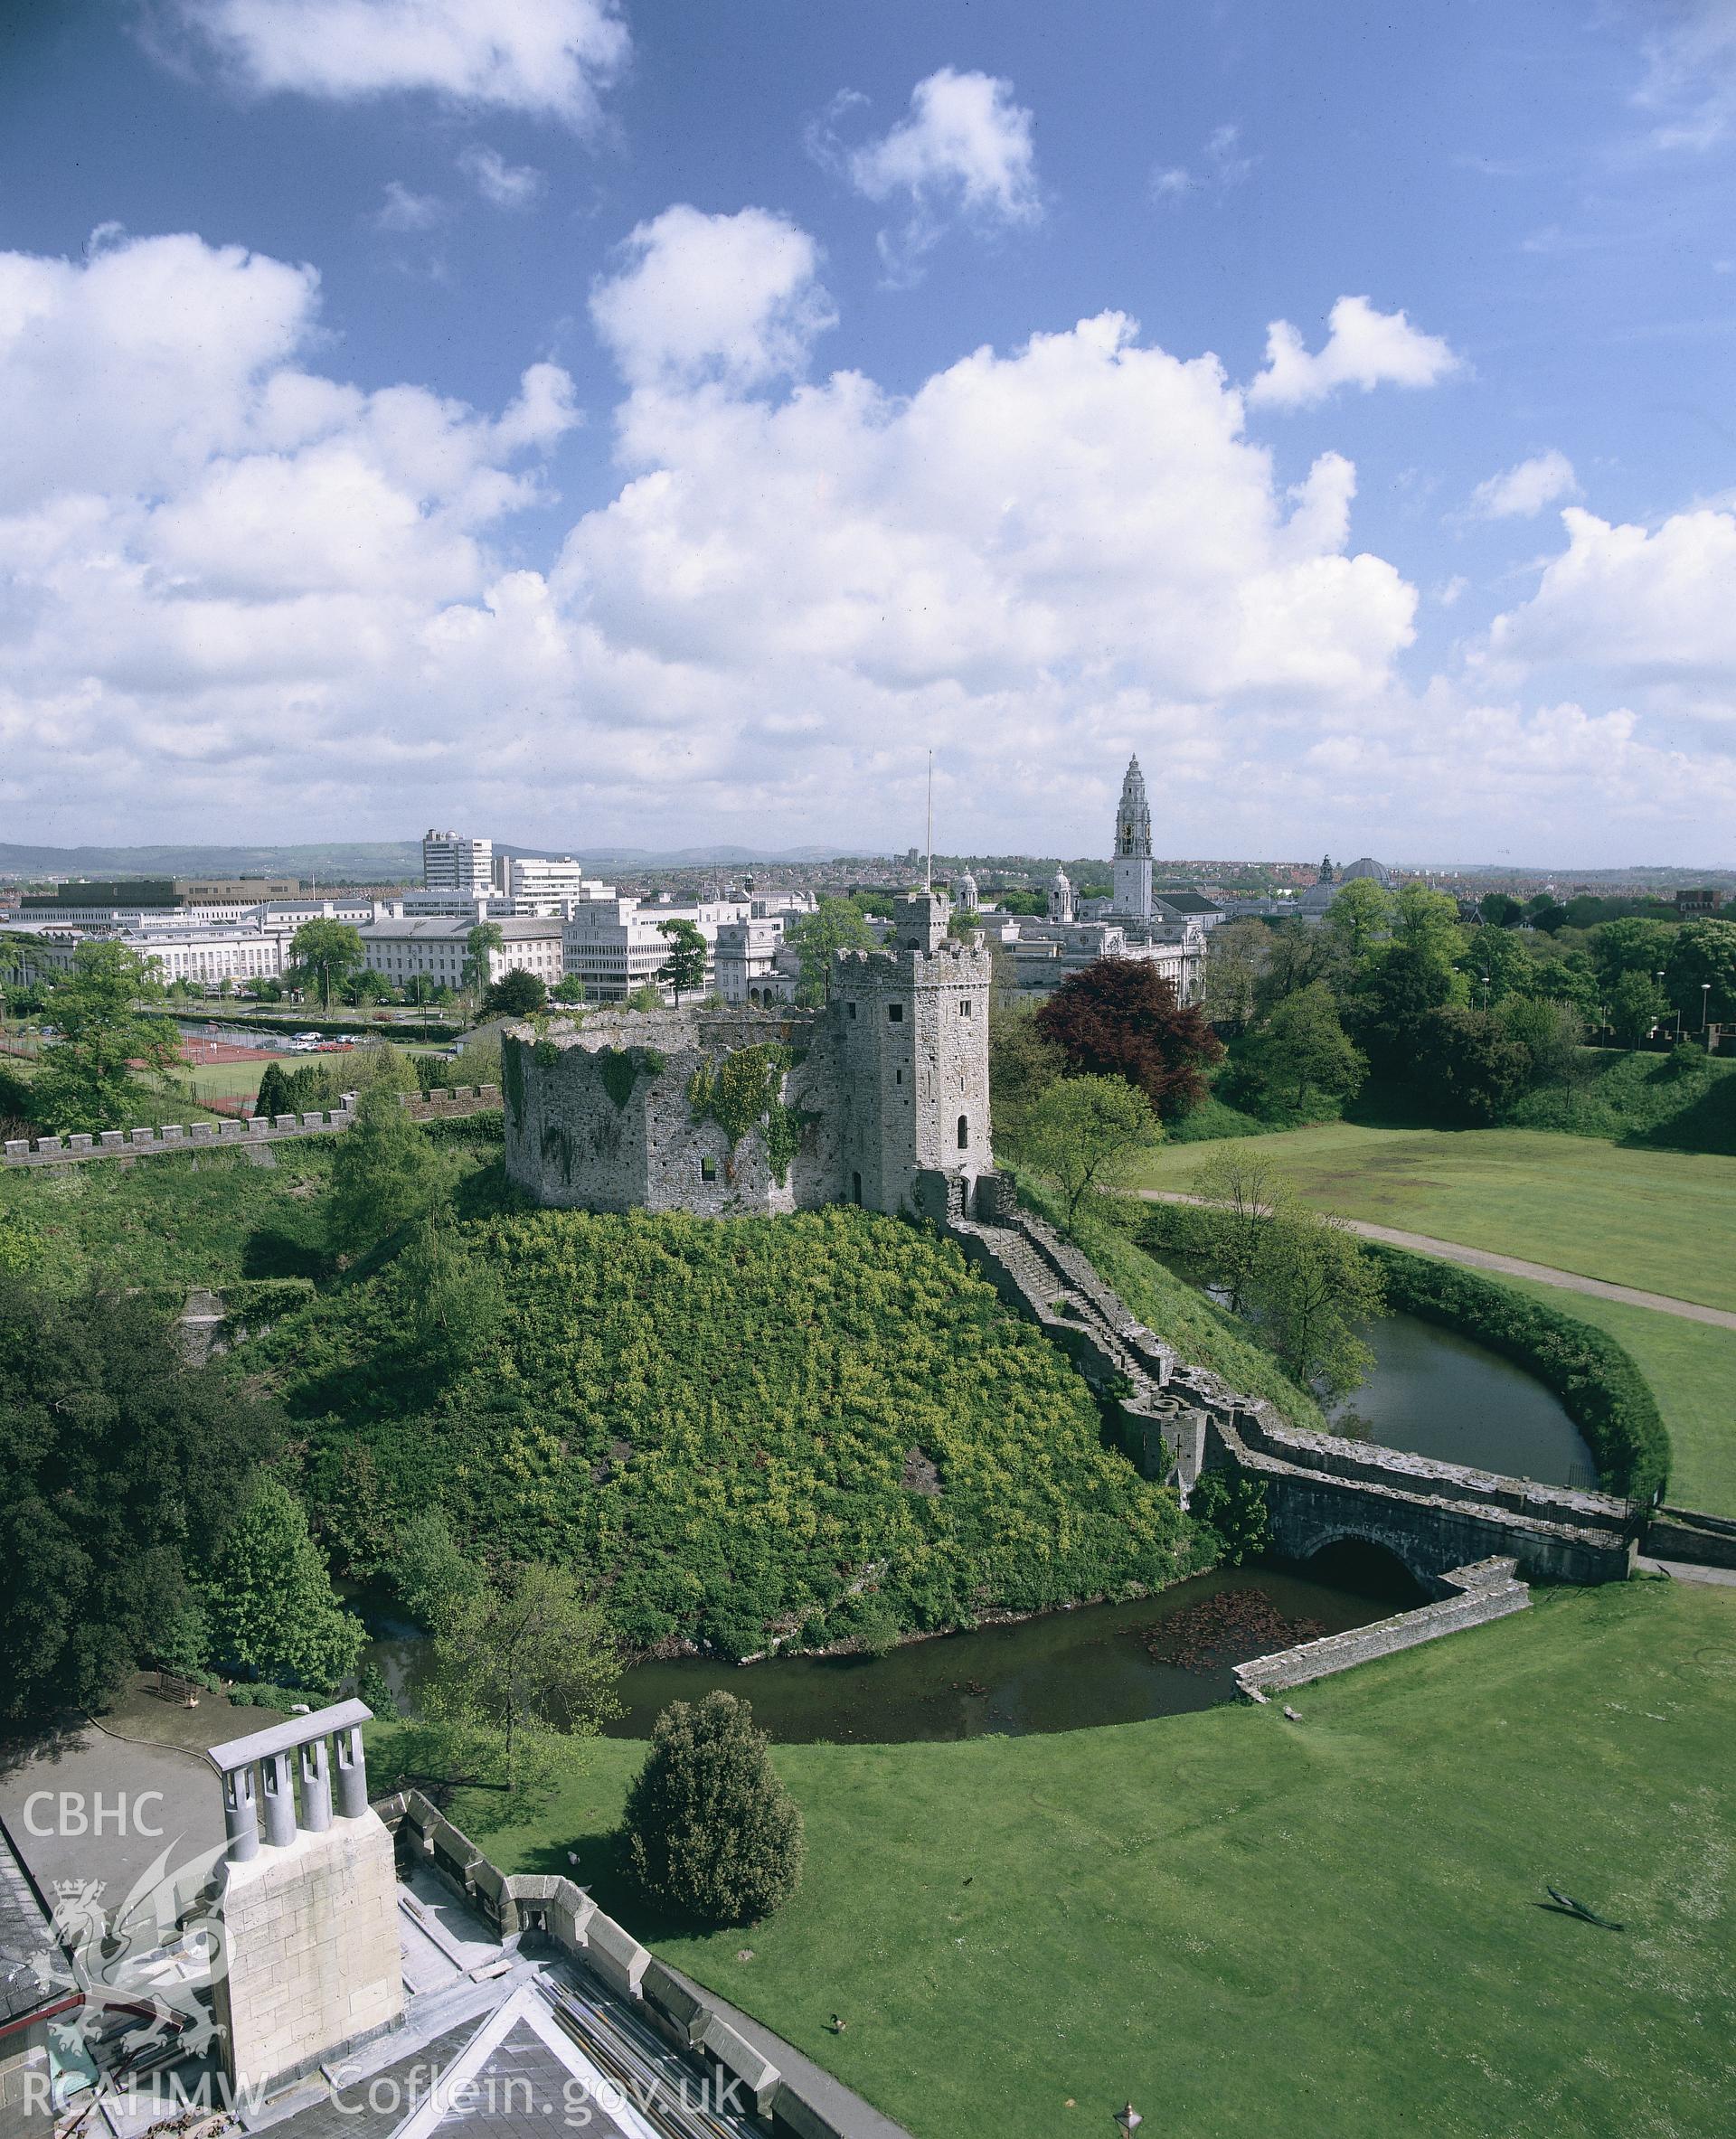 RCAHMW colour transparency of a general exterior view of Cardiff Castle, set in the Cardiff City landscape.